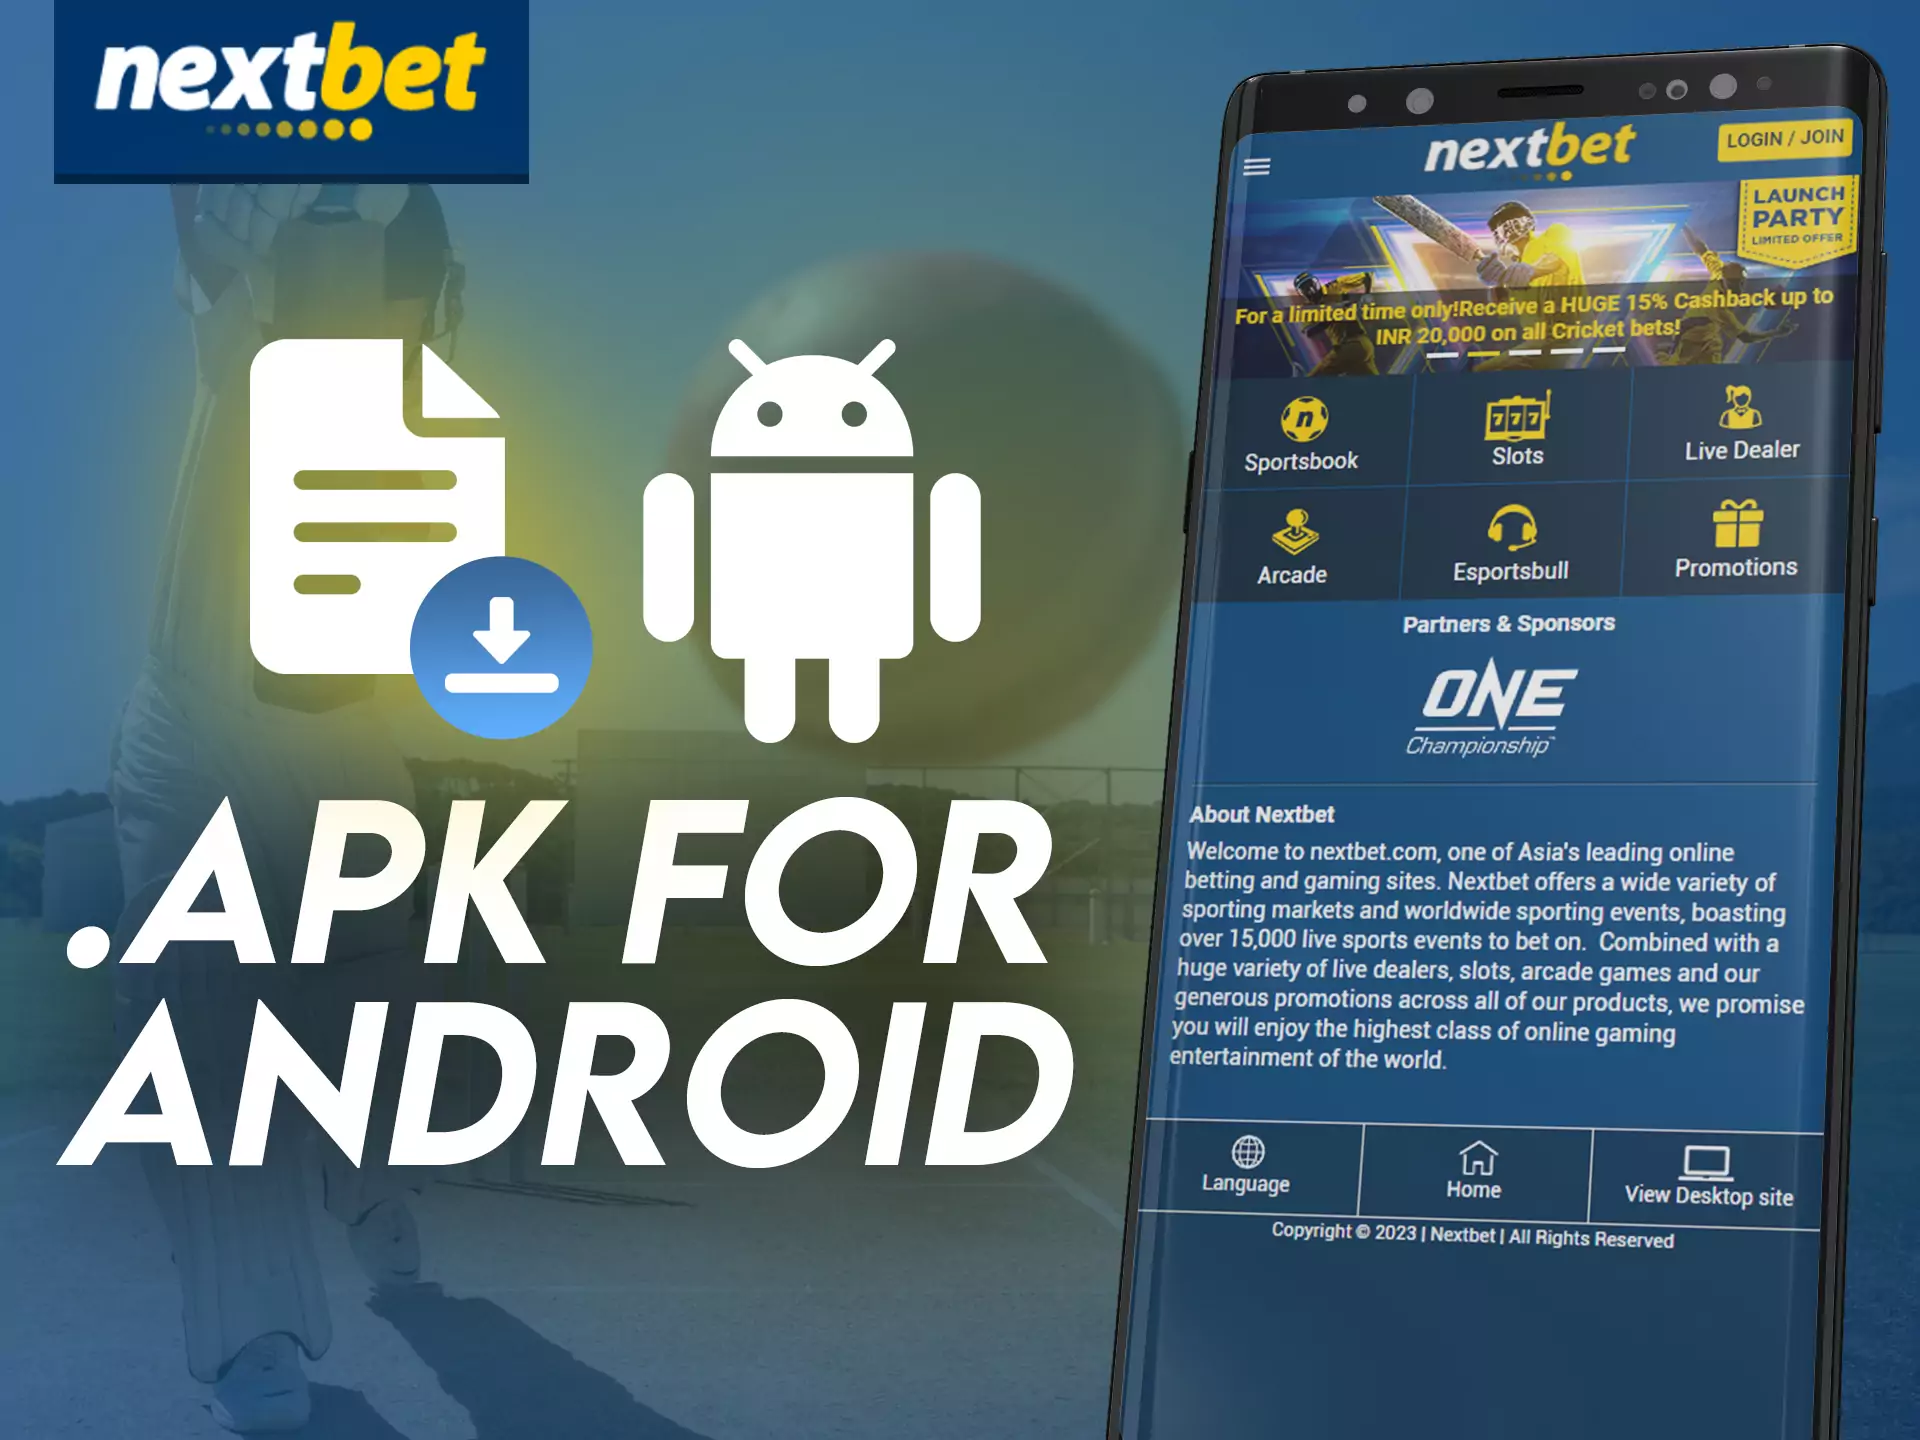 Download the Nextbet app and install it on your Android phone.